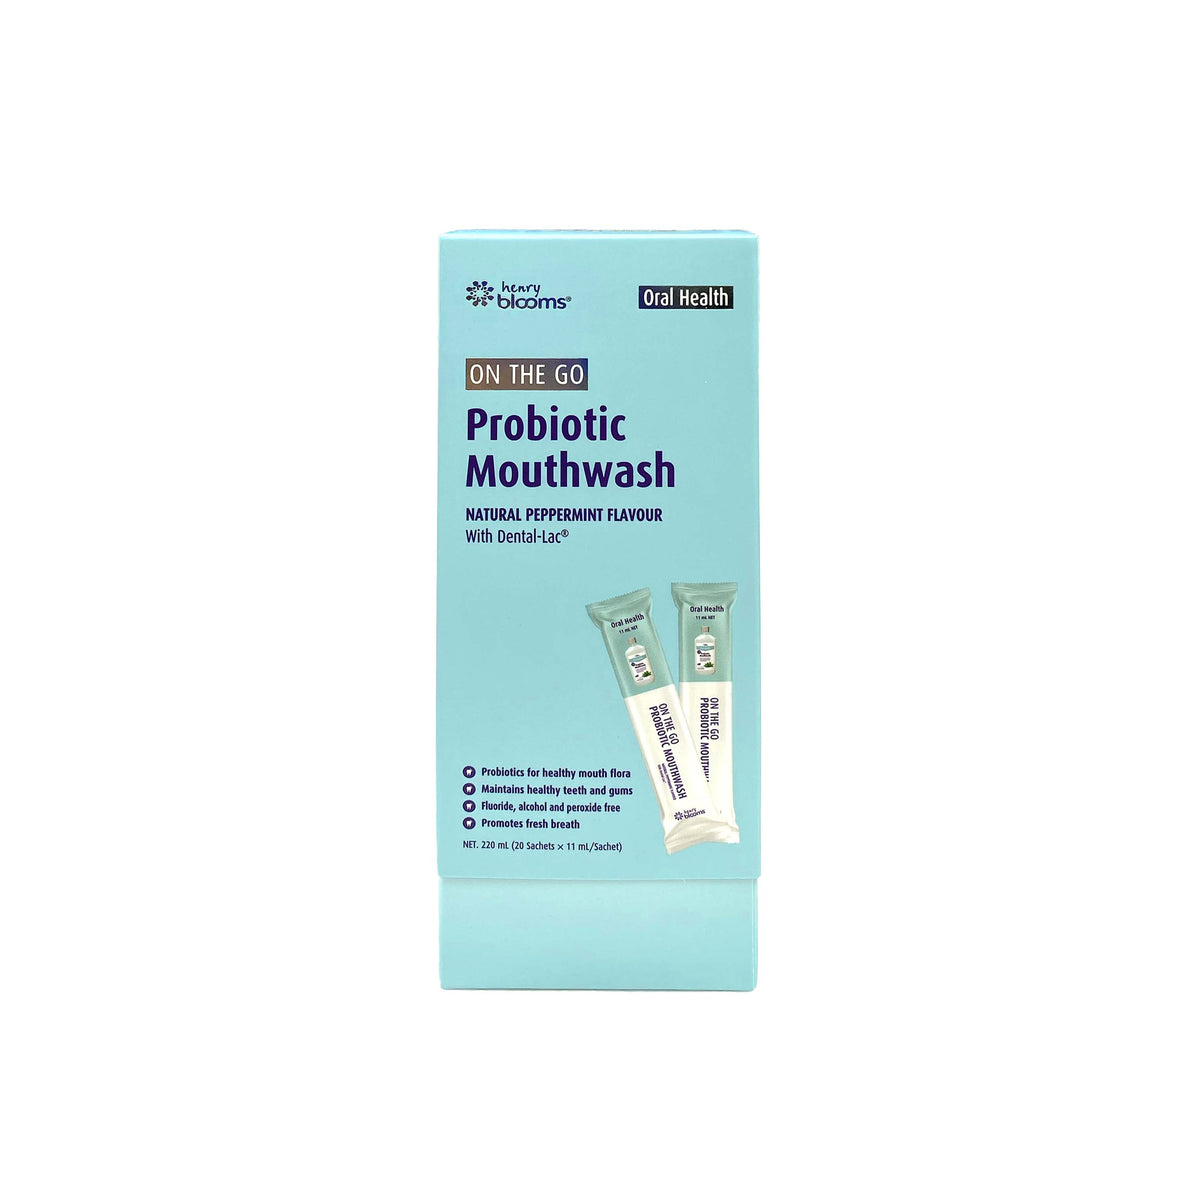 Henry Blooms On the Go Probiotic Mouthwash 20 sachets 11ml